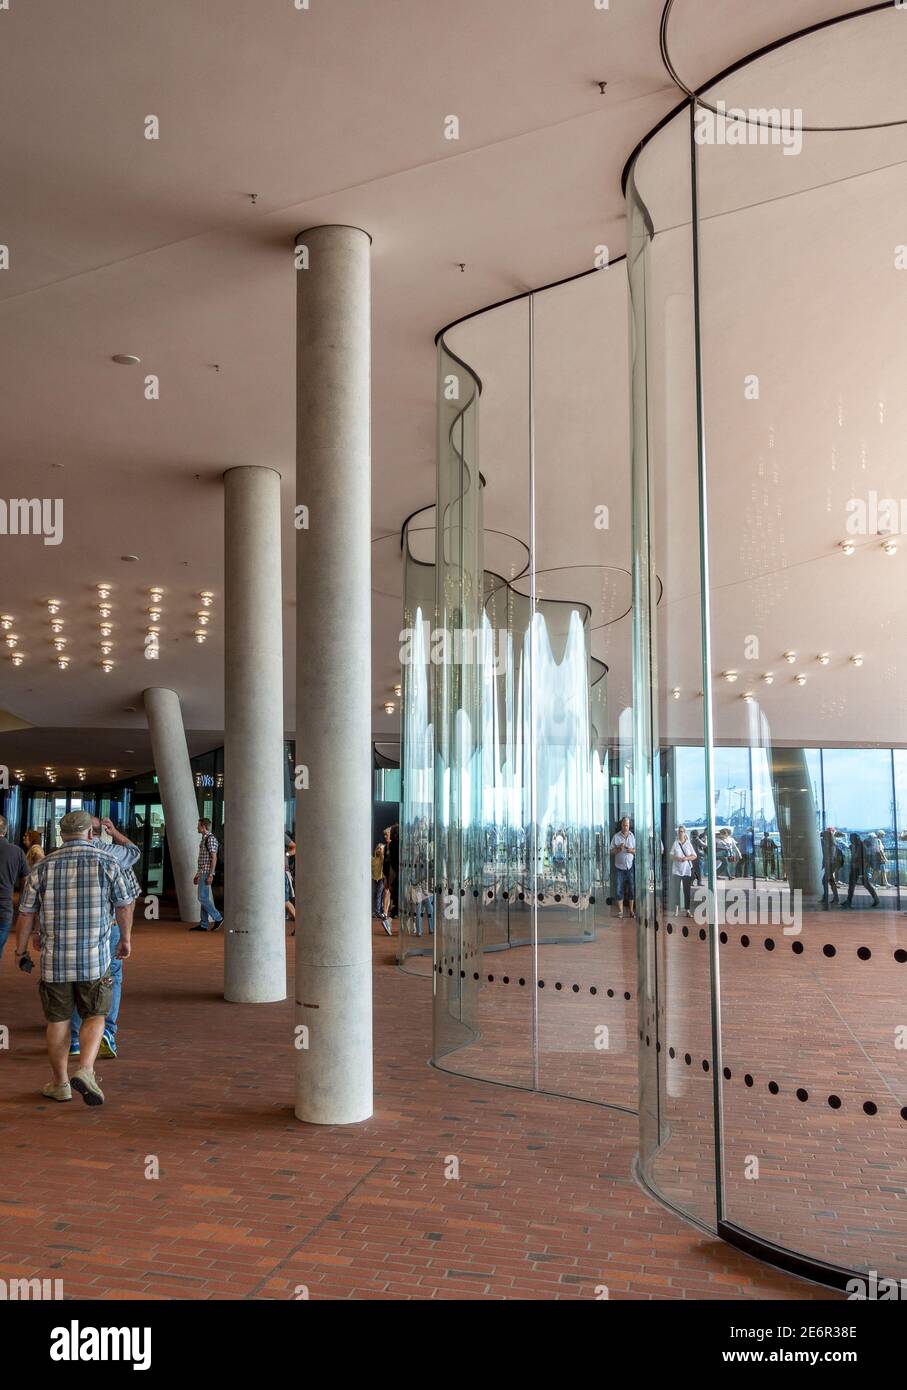 The impressive glass door entrance to the Elbphilharmonie a concert hall in Hamburg, Germany, on the Grasbrook peninsula of the Elbe River Stock Photo